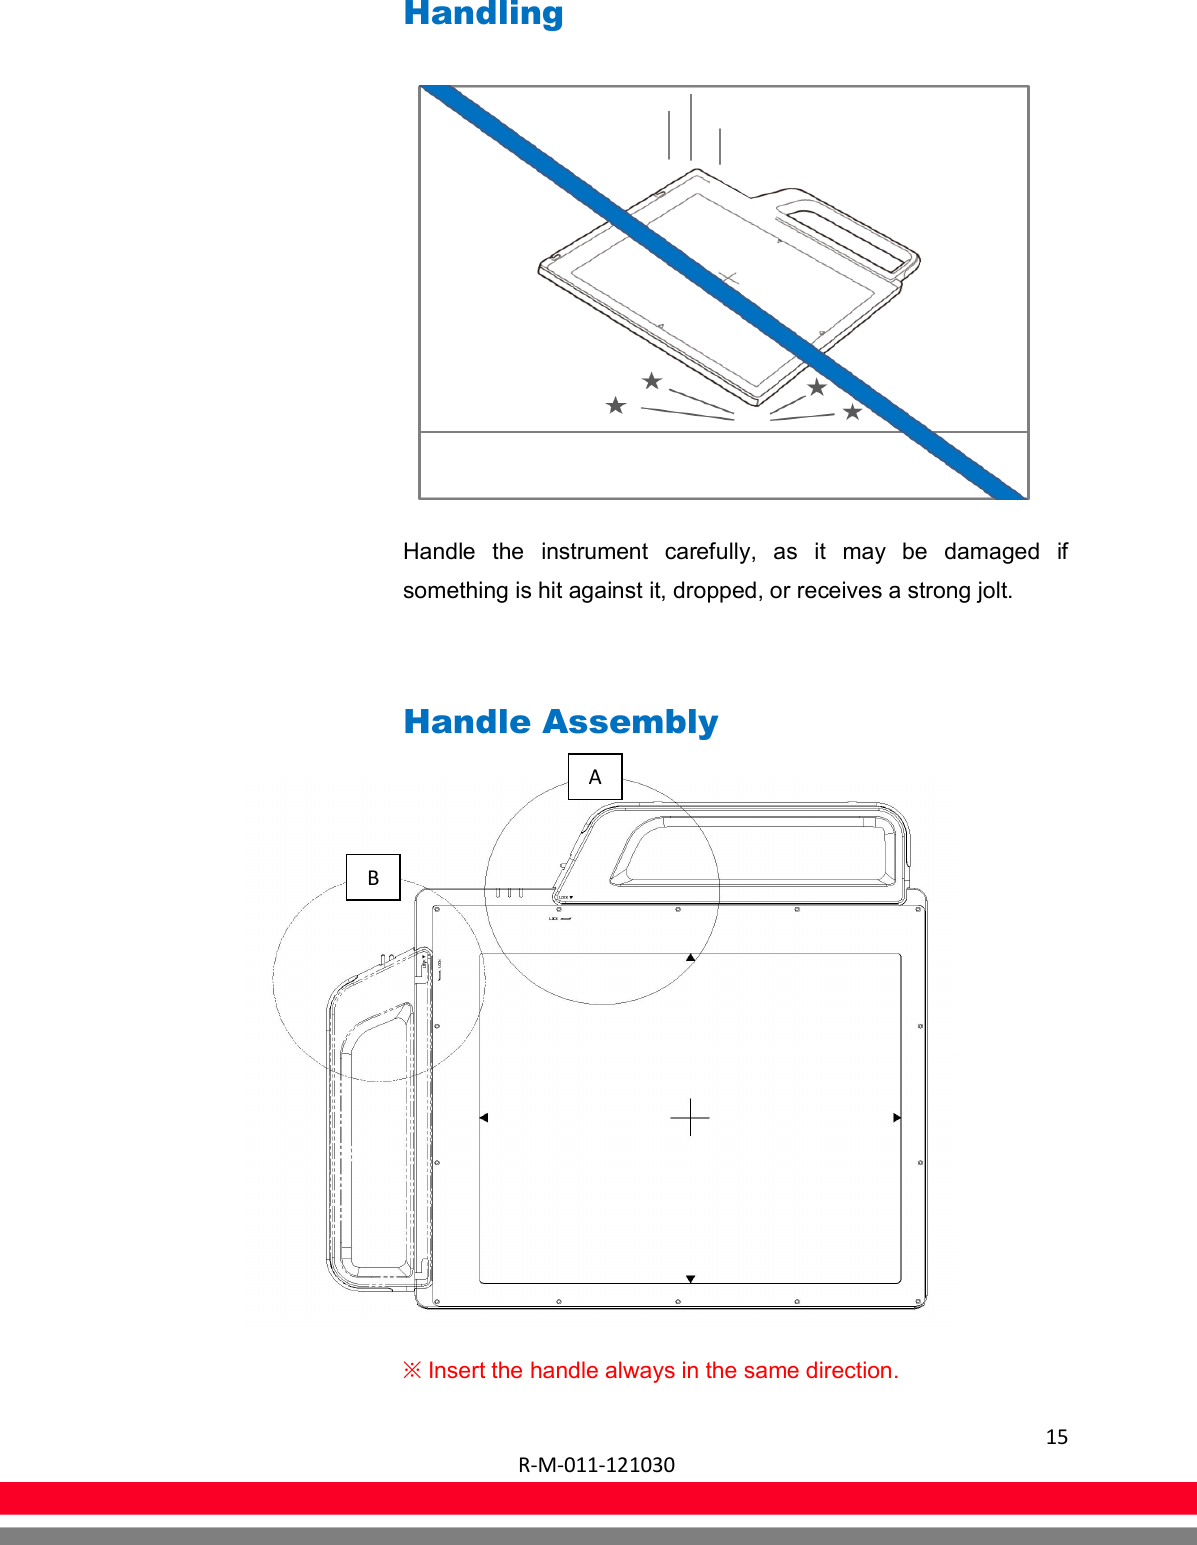  15  R-M-011-121030    Handling  Handle  the  instrument  carefully,  as  it  may  be  damaged  if something is hit against it, dropped, or receives a strong jolt.  Handle Assembly  ※ Insert the handle always in the same direction. B A 